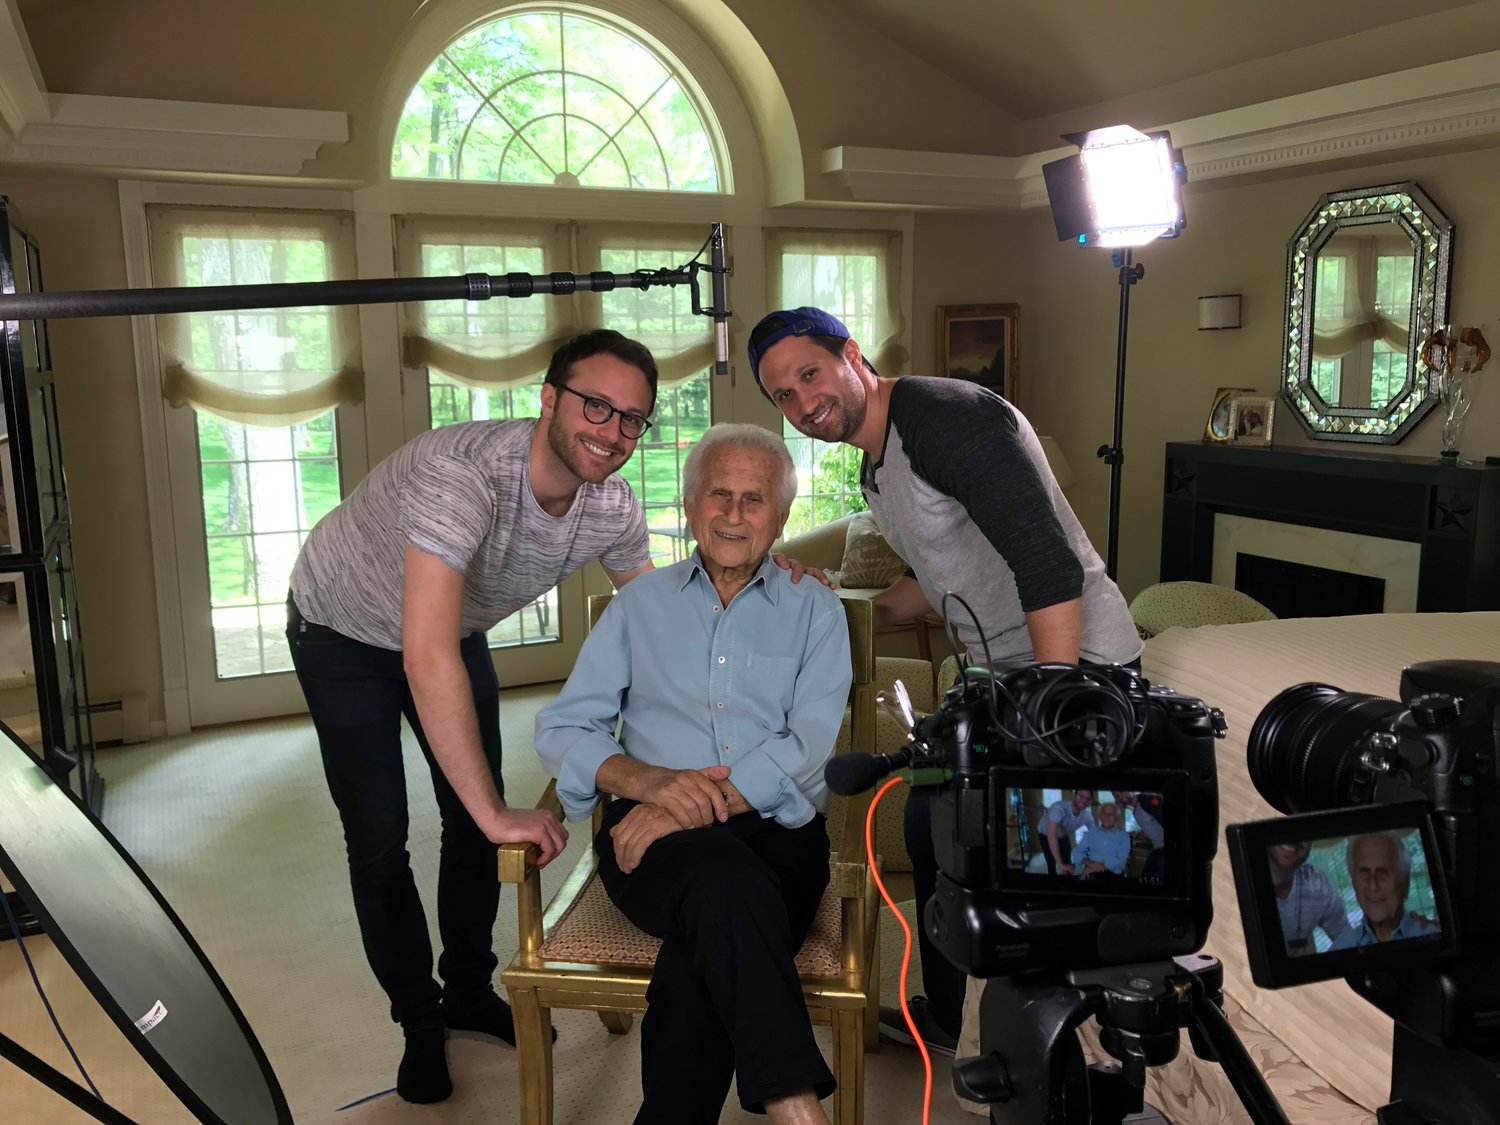 ‘The Starfish’ documentary is a family project. From left, producer Alex Utay, another one of Herb Gildin’s grandchildren, Herb, and the director Tyler Gildin.